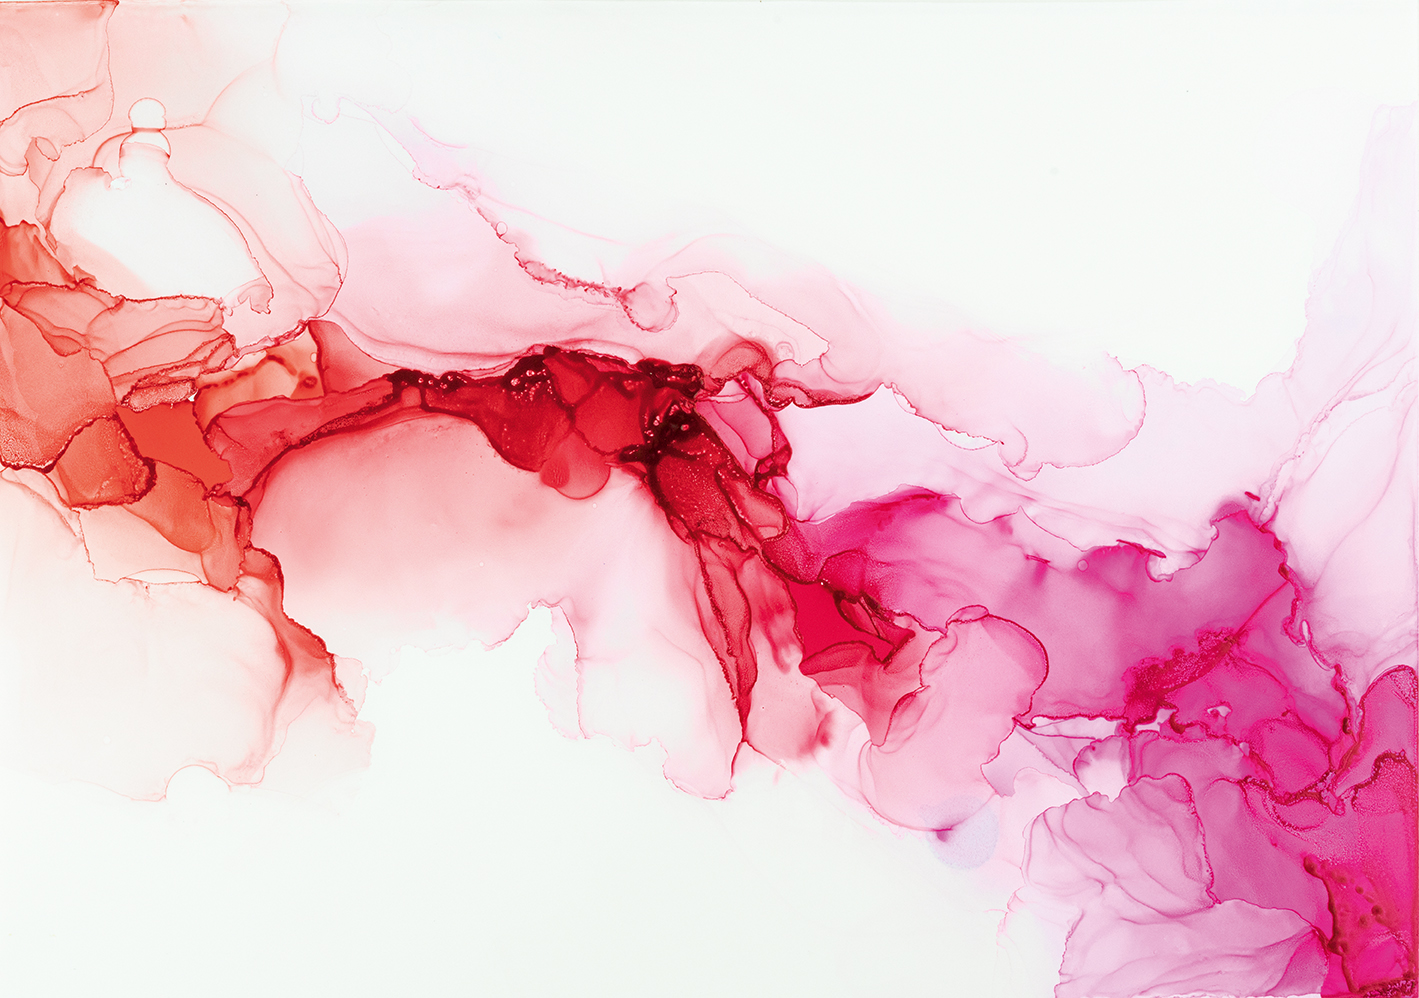 White tile blotted with red and pink alcohol ink in a marbled pattern.